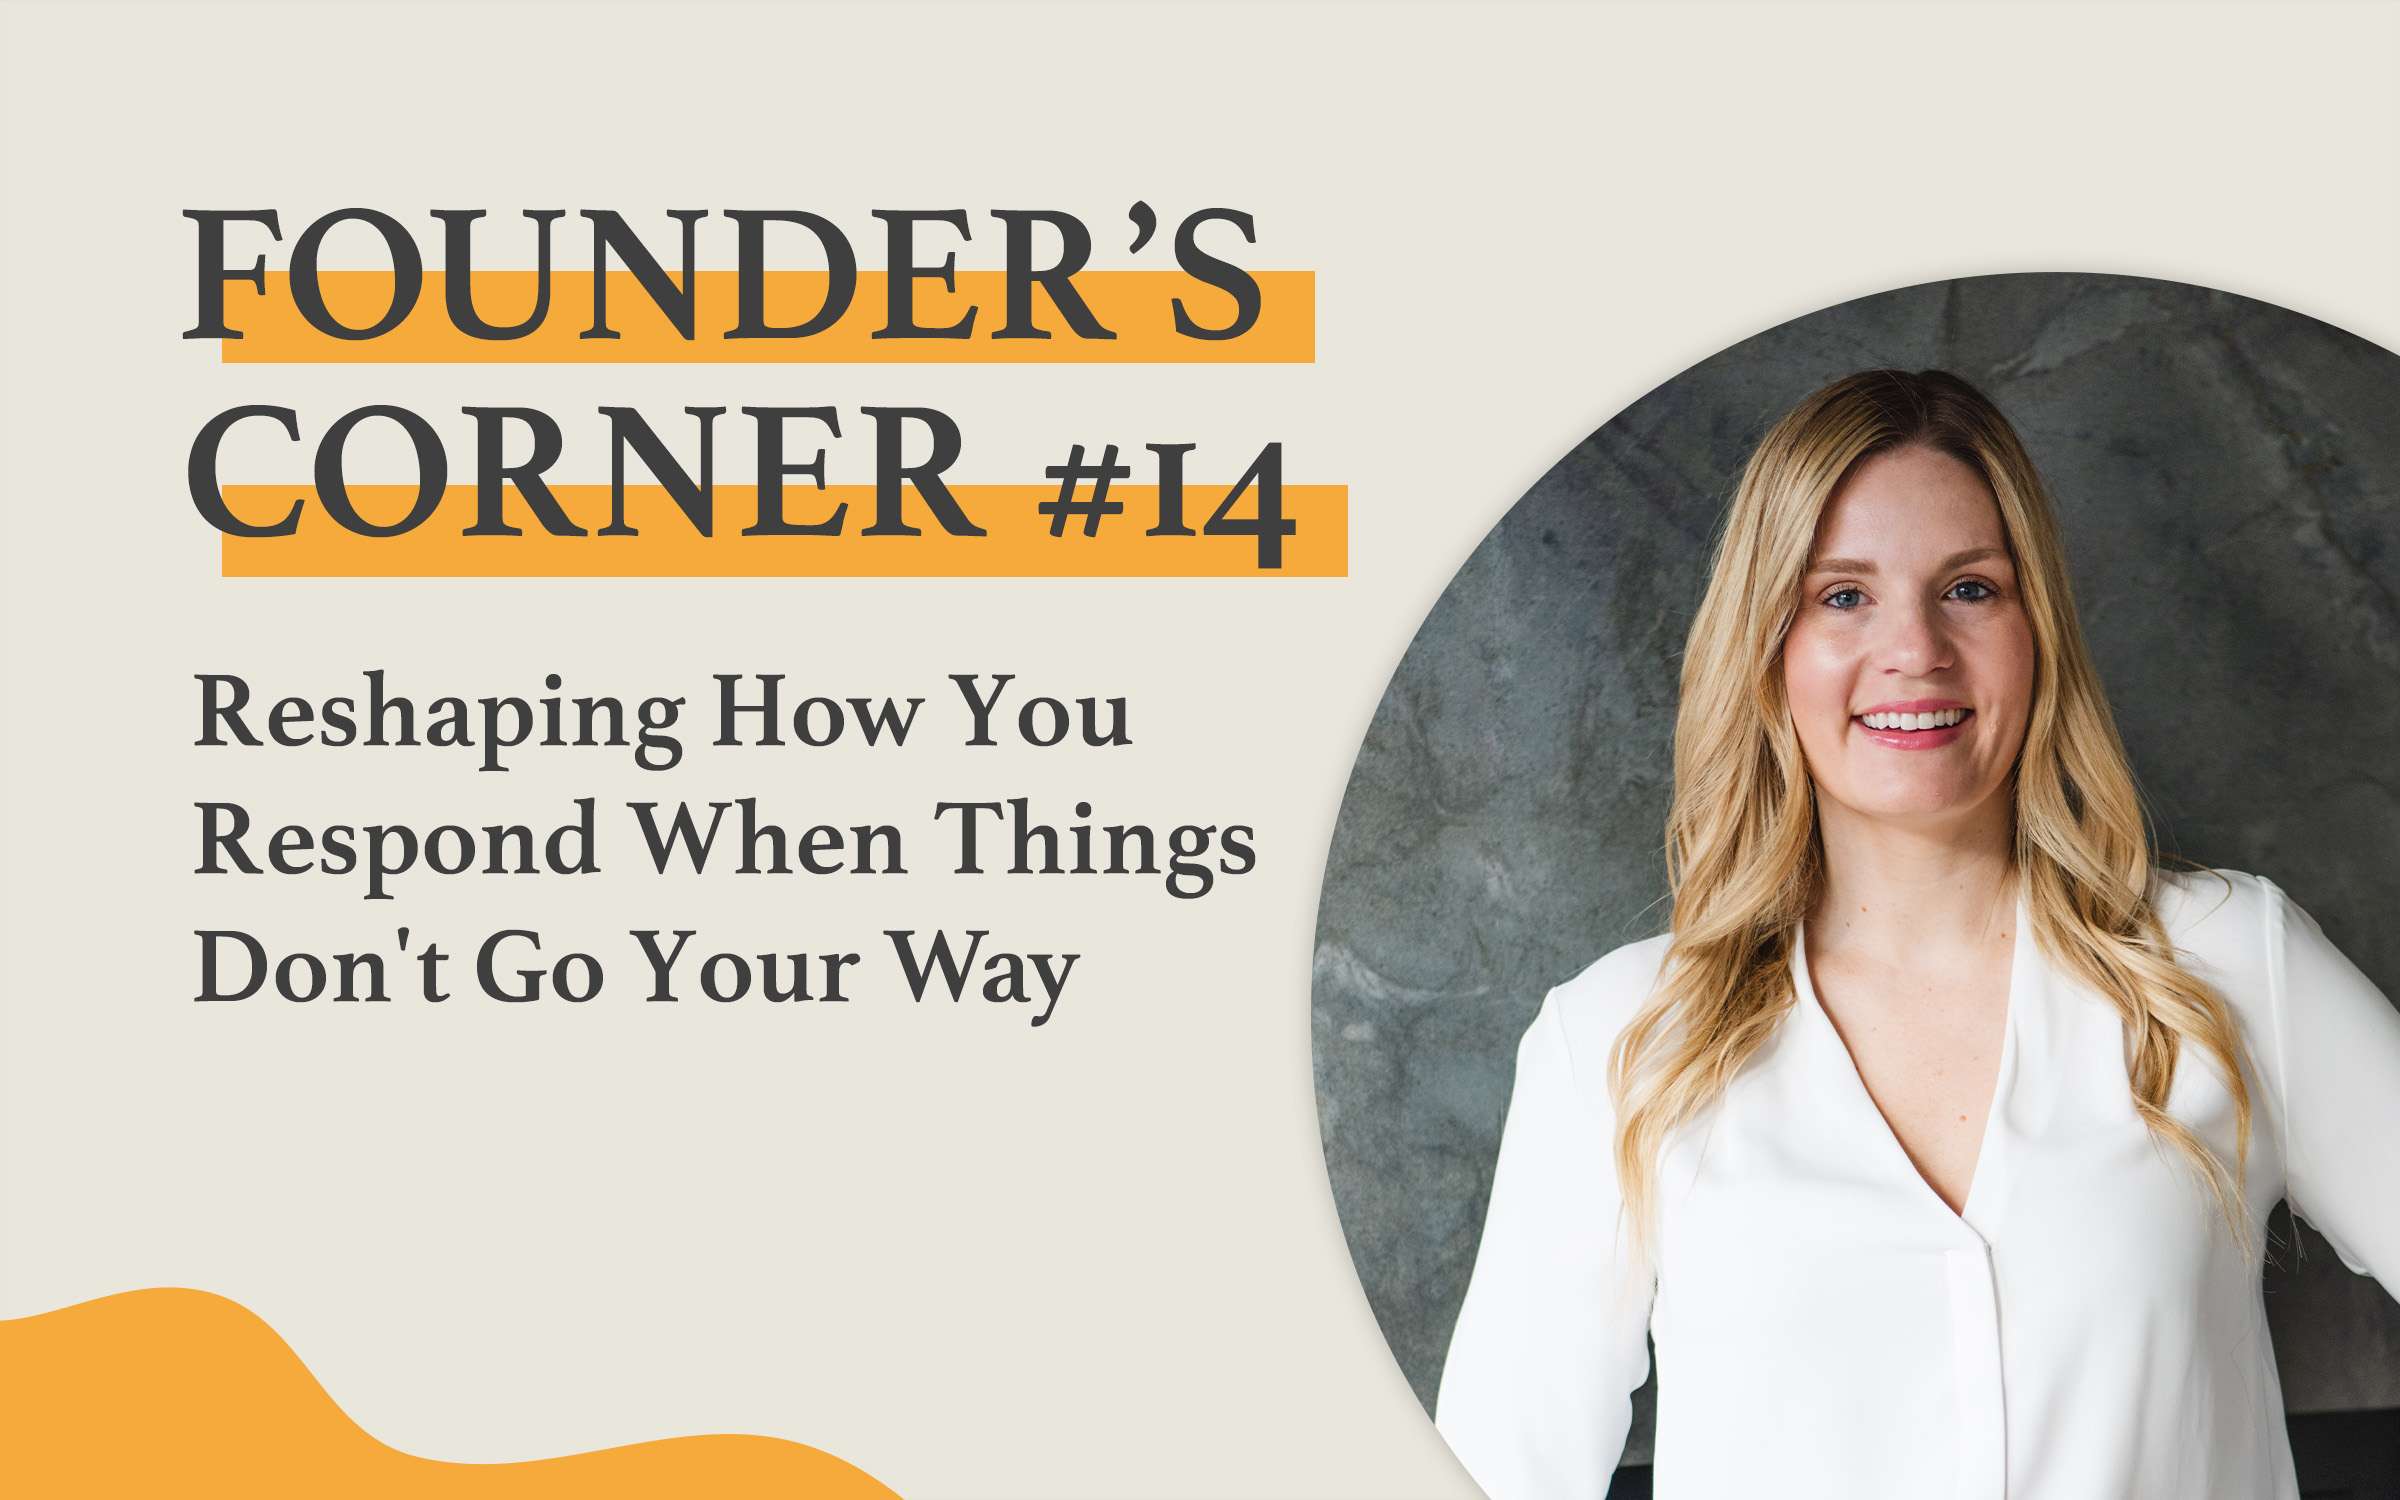 Founder's Corner #14 Reshaping How You Respond When Things Don't Go Your Way